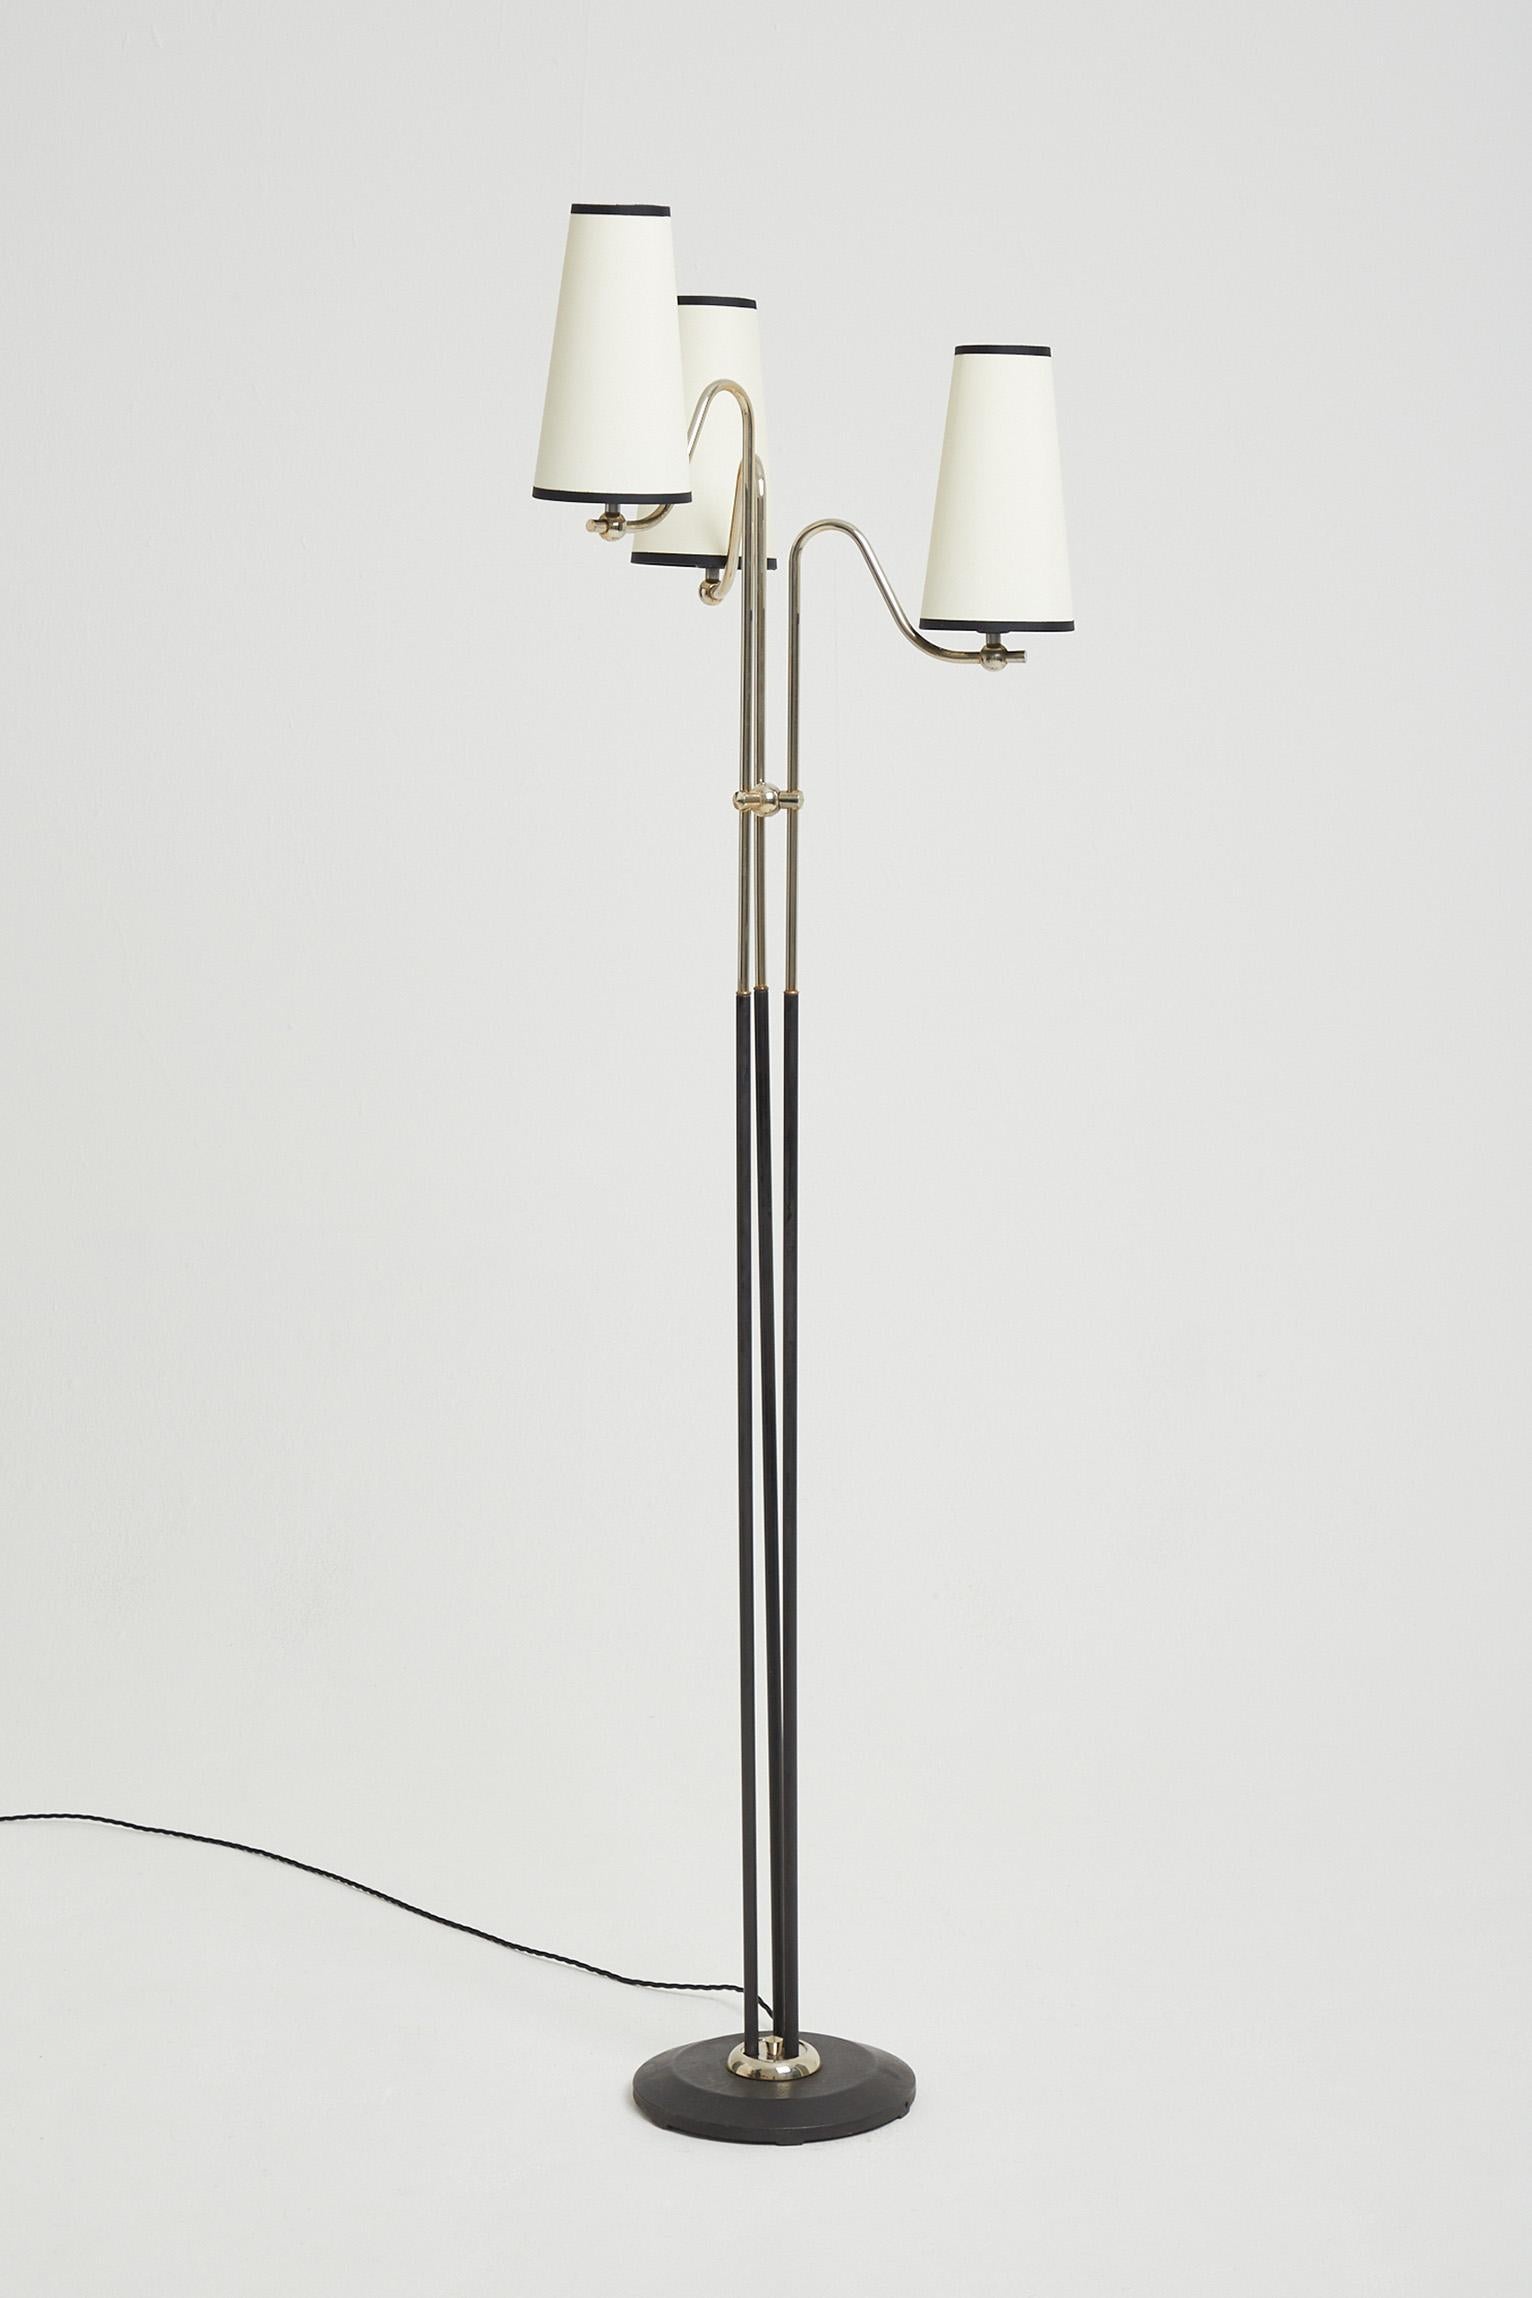 A three light nickel and black iron floor lamp, with bespoke shades.
France, third quarter of the 20th century.
Measures: With the shades: 163 cm high by 47 cm diameter.
Lamp base only: 150 cm high by 25 cm diameter base.